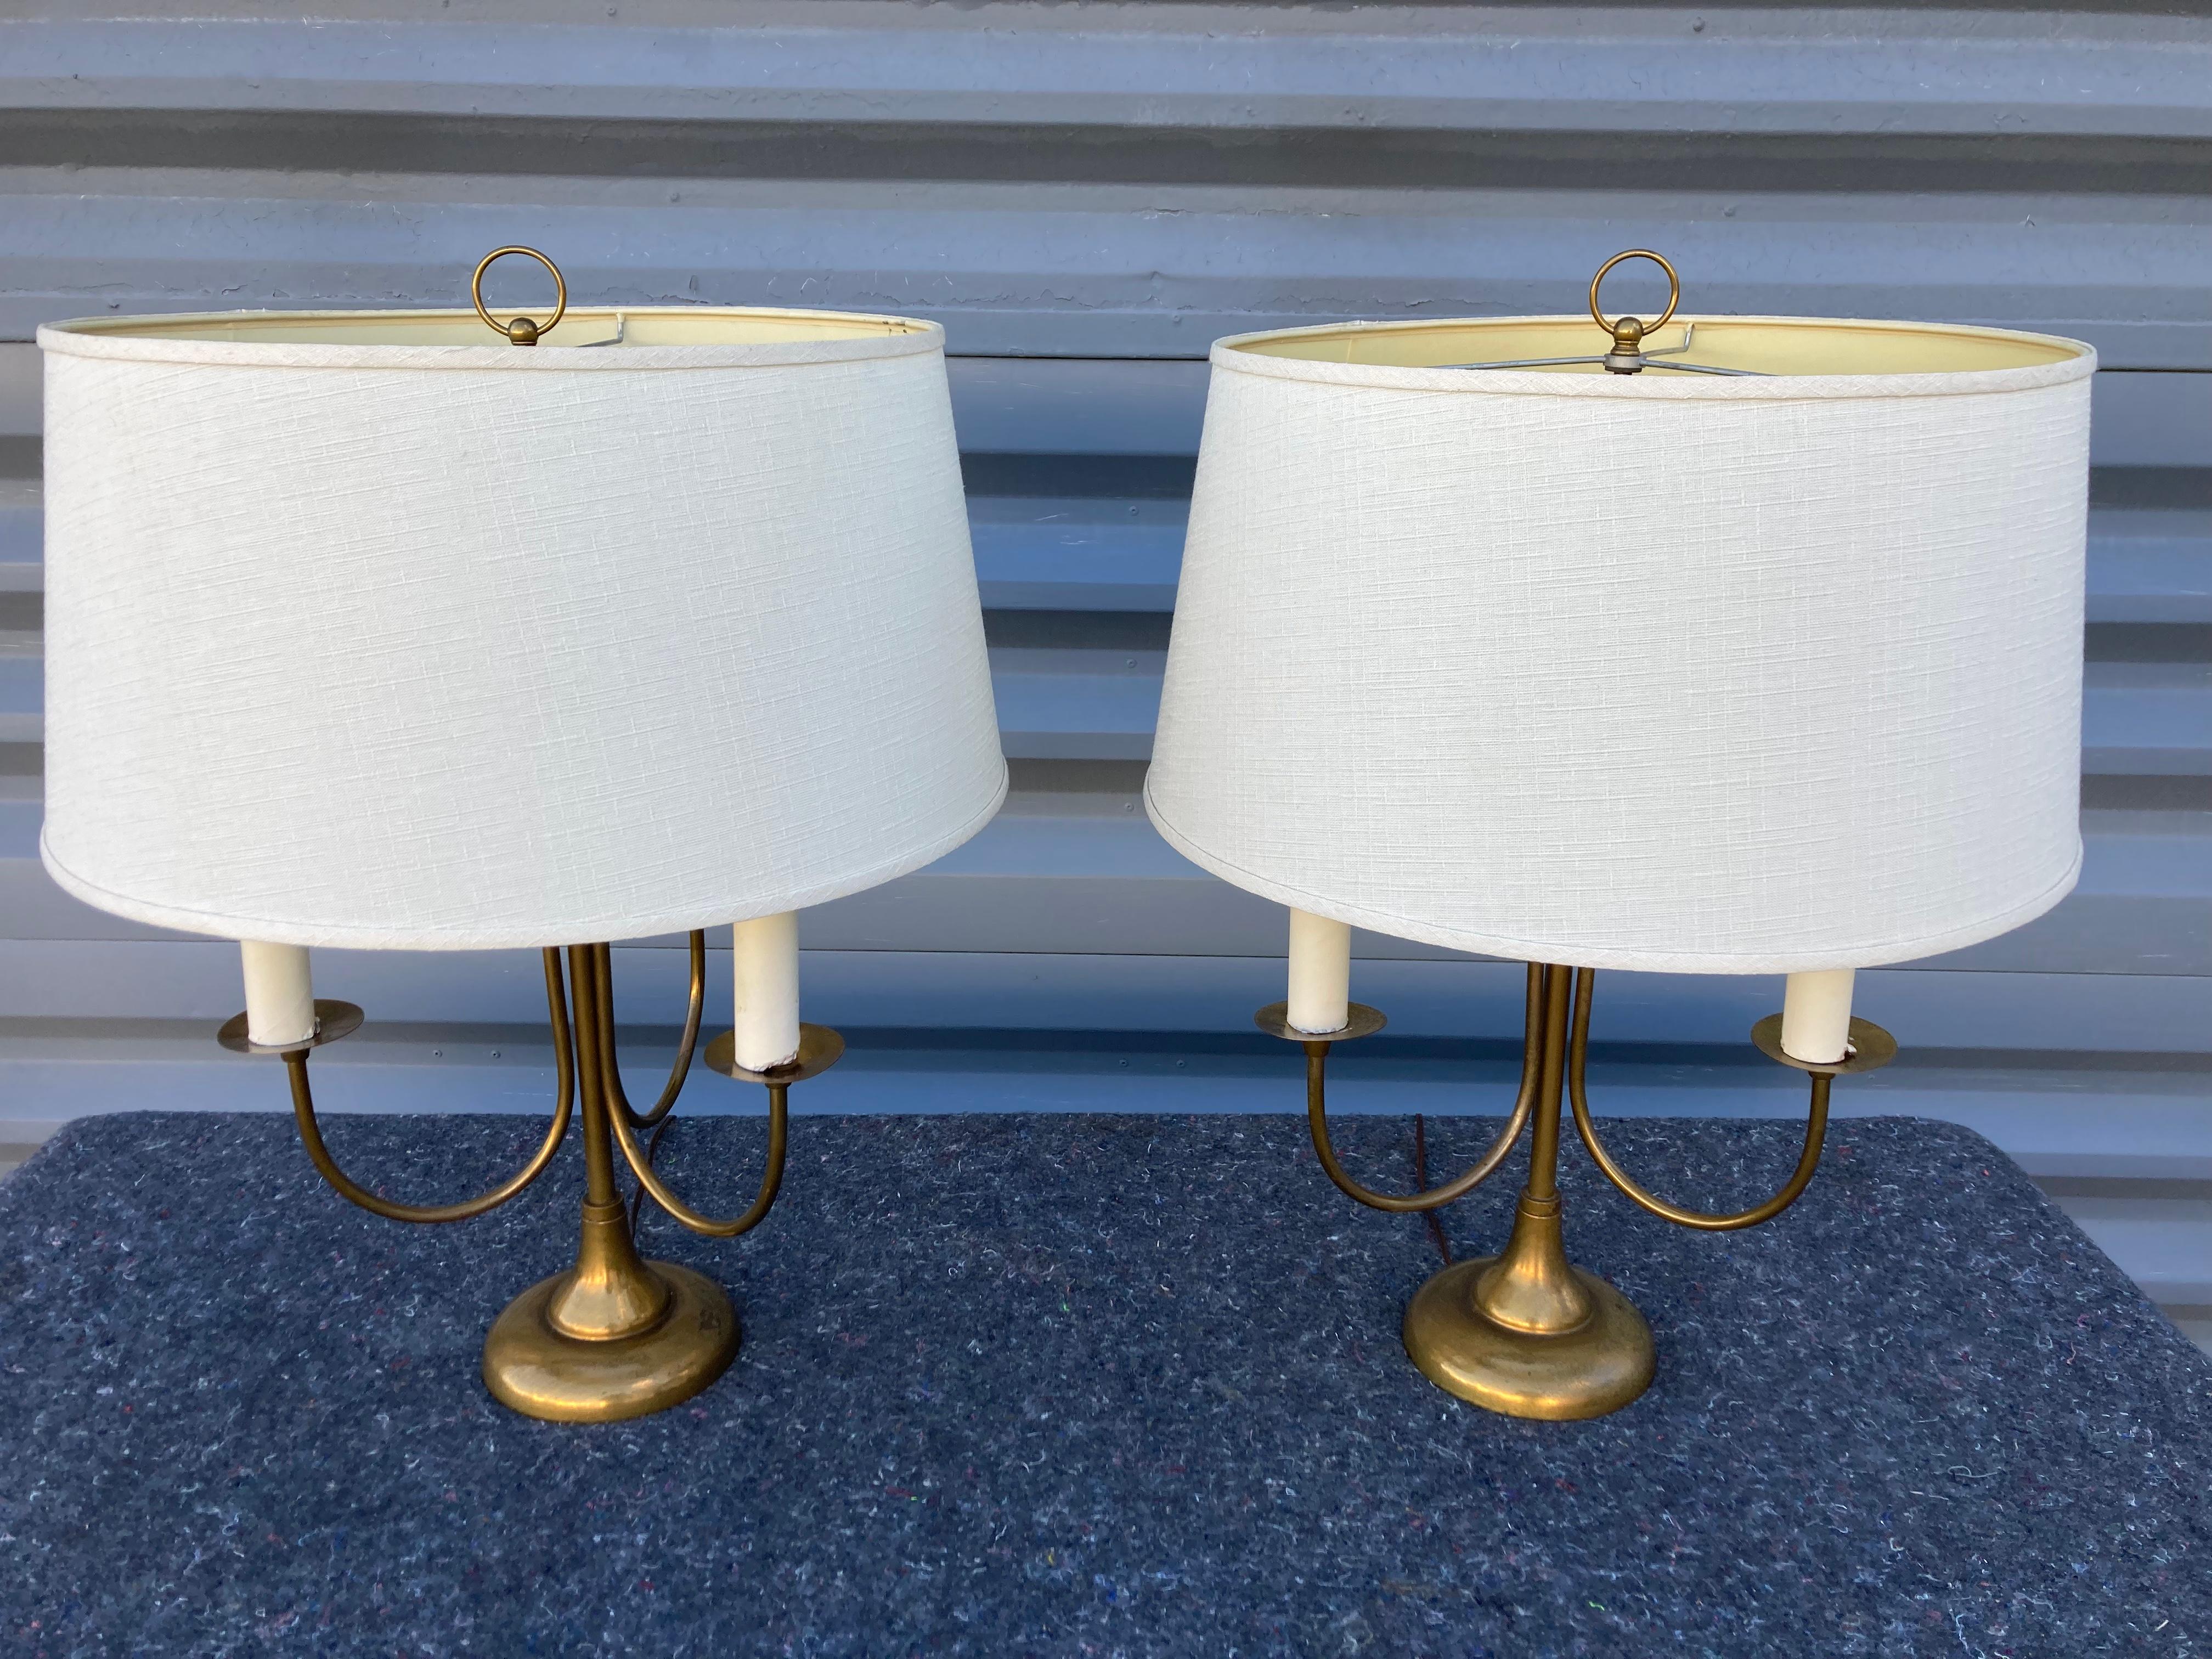 Pair of Mid-Century Modern Table Lamps, Brass, USA, 1950s For Sale 1